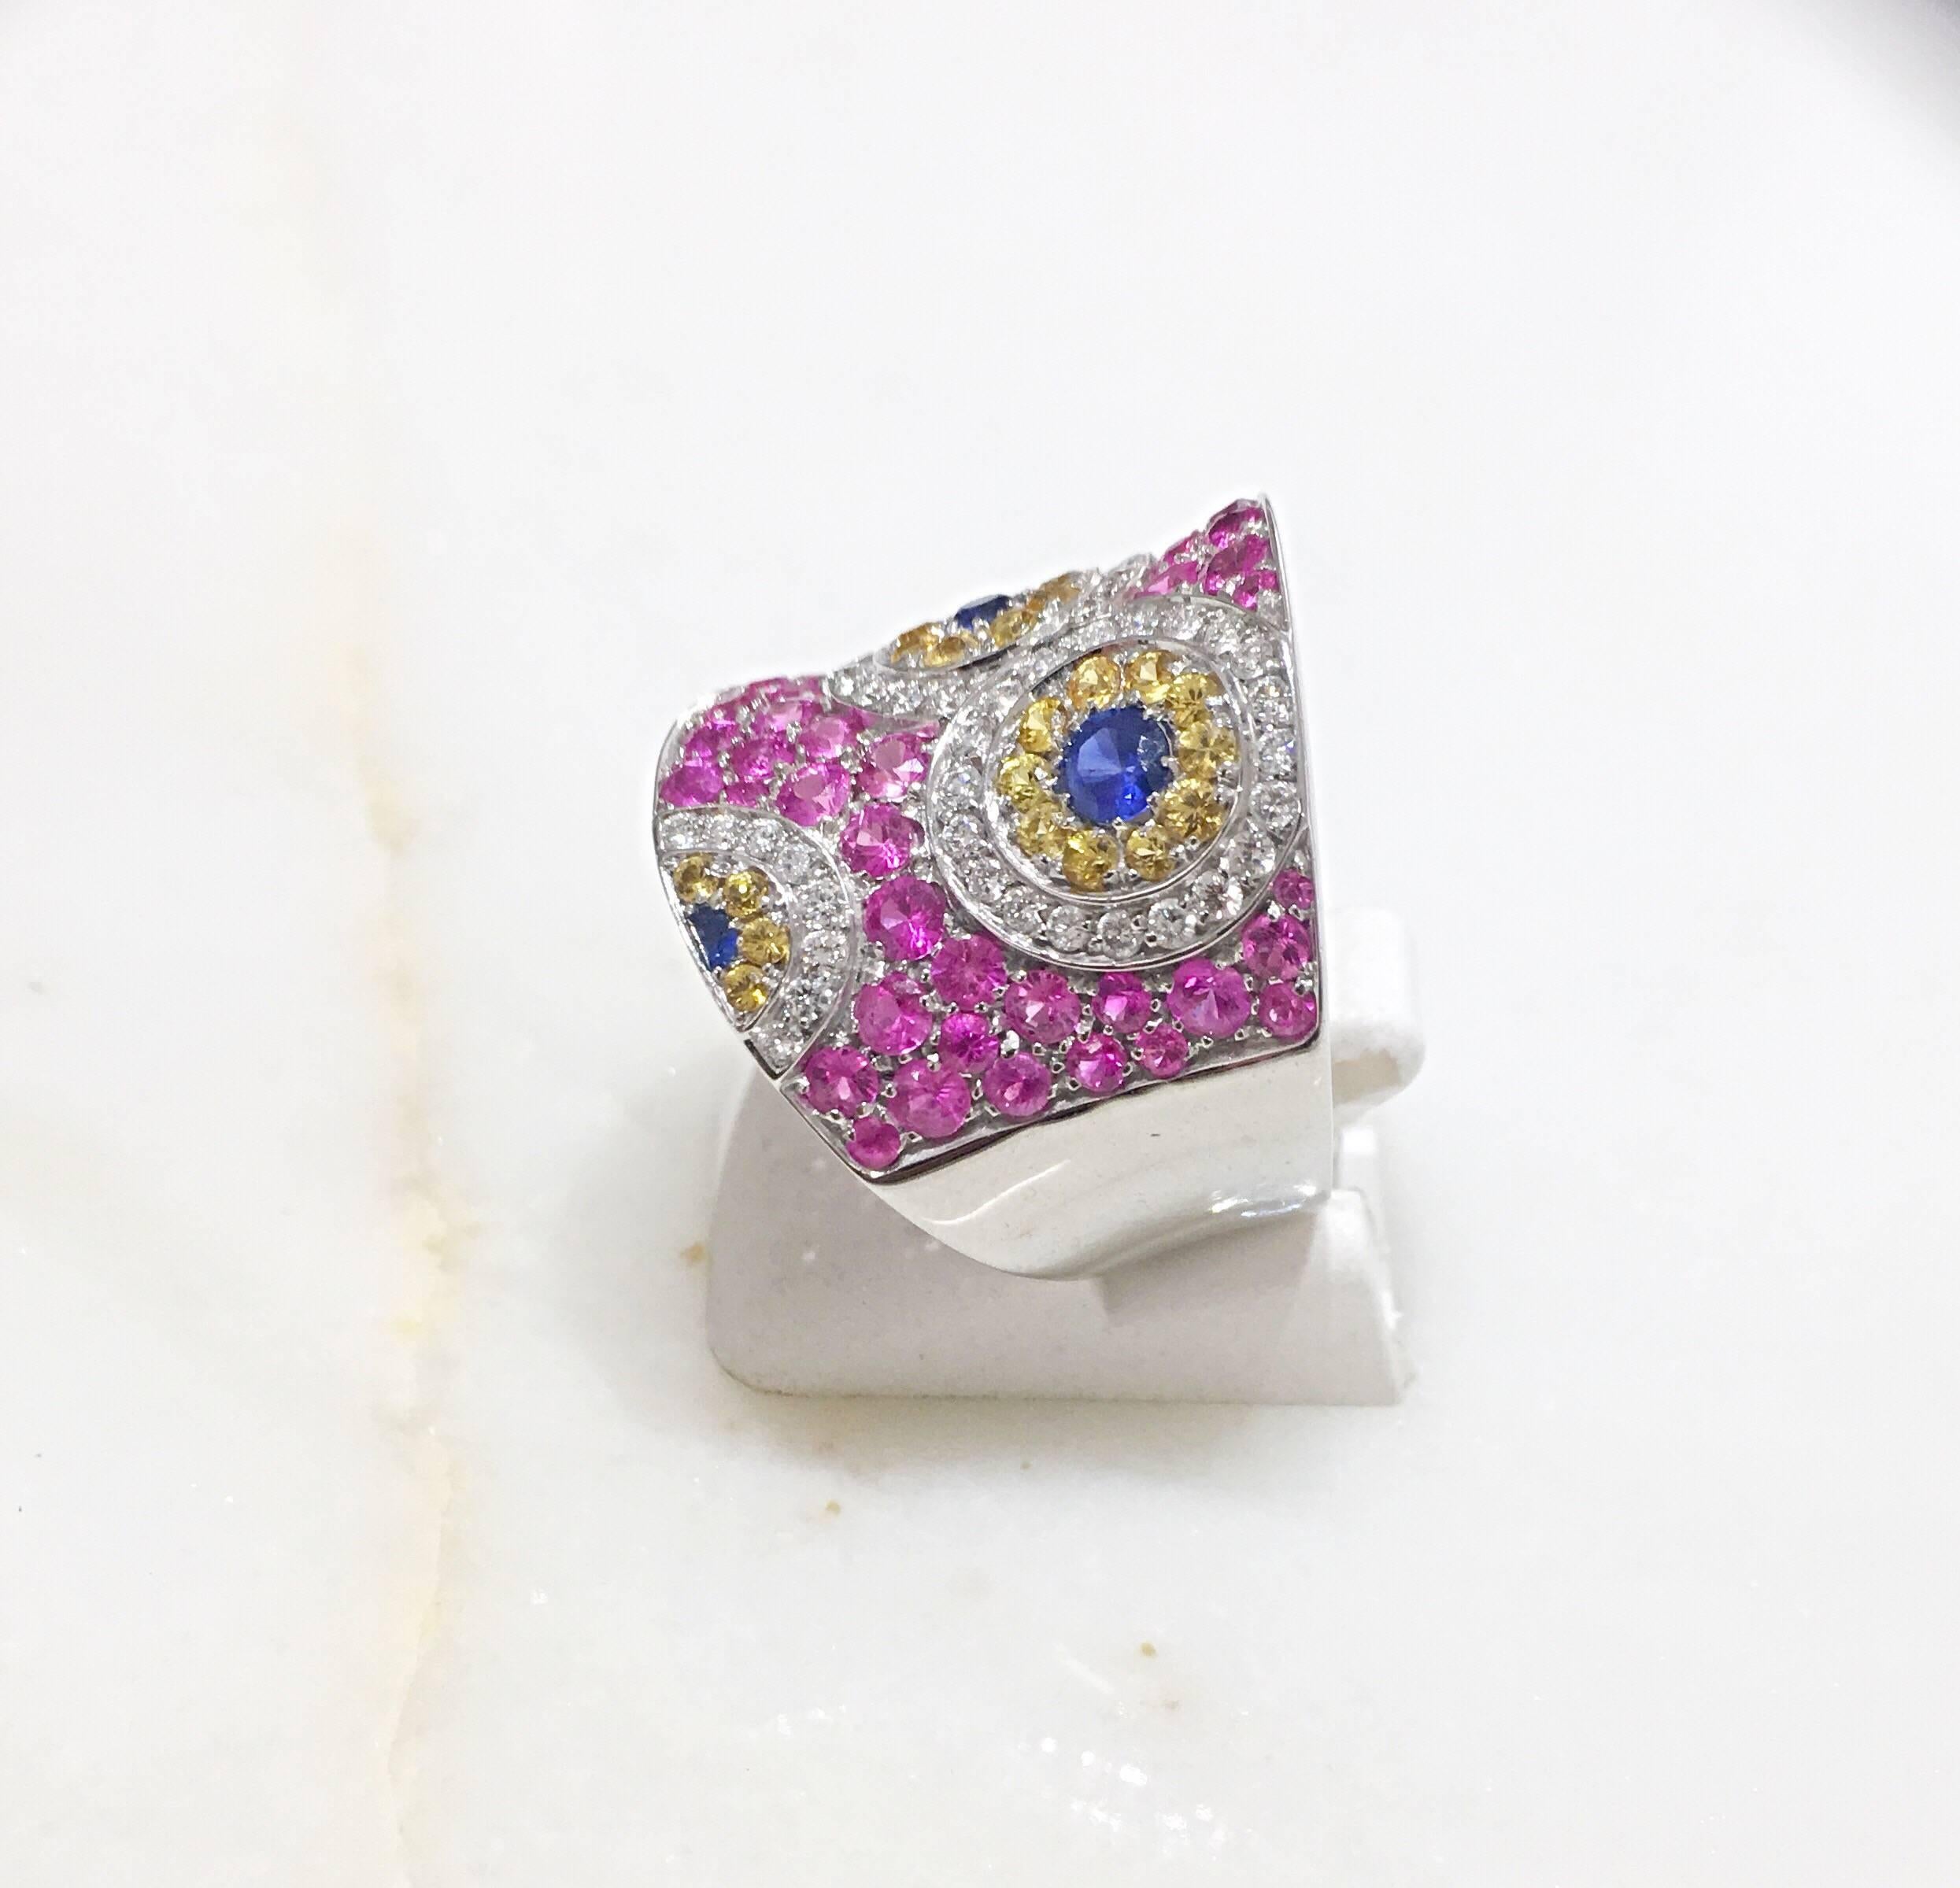 This Cellini Jewelers ring features a Kaleidoscope of white diamond, yellow and blue sapphires which are set within a pink sapphire concave shaped ring. Set in 18 karat white gold. 
This whimsical design is part of the exclusive collection created